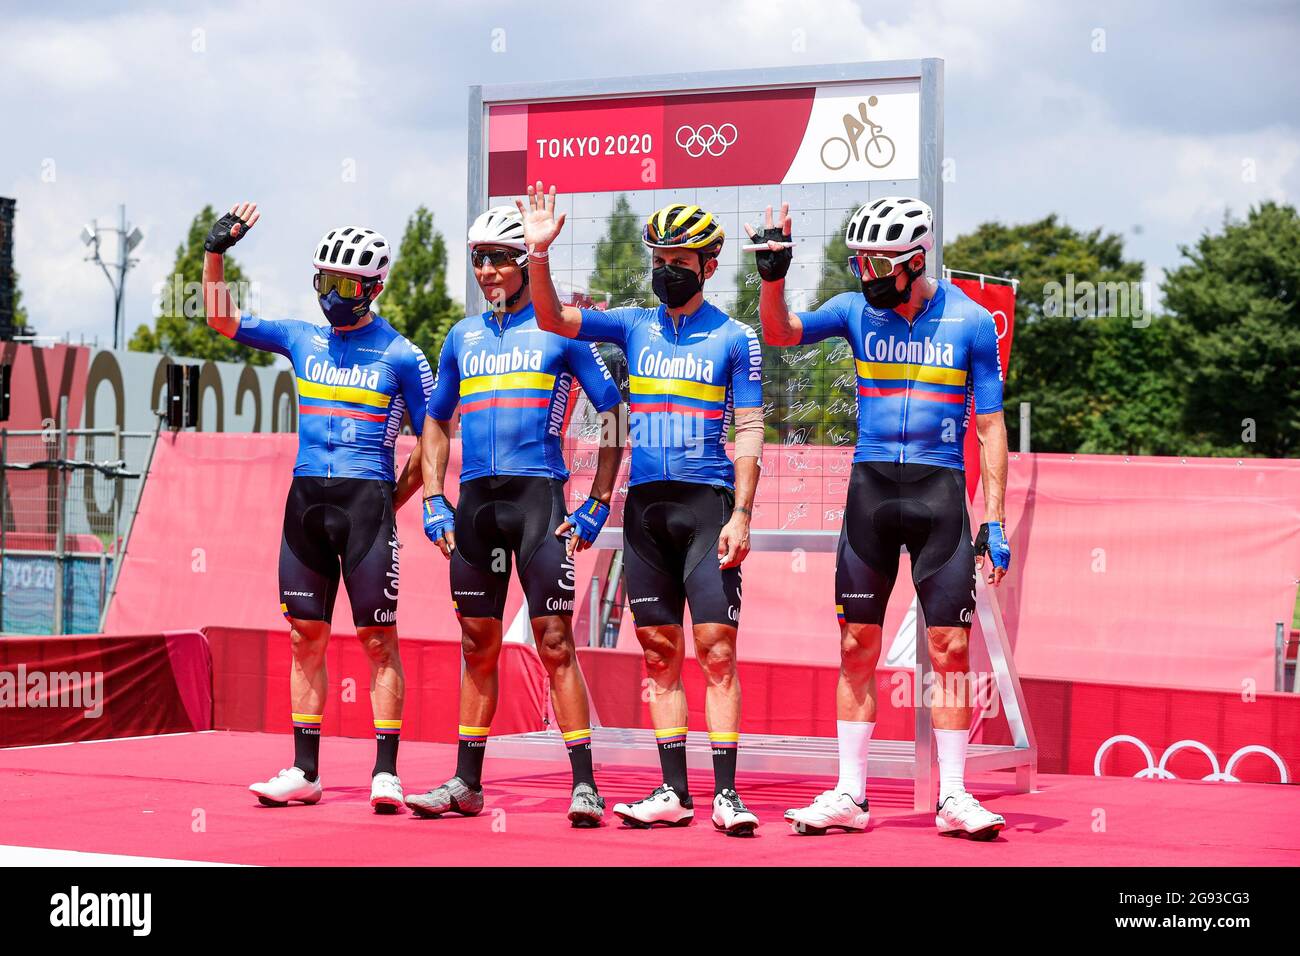 Tokyo, Japan. 24th July, 2021. TOKYO, JAPAN - JULY 24: Sergio Andres Higuita Garcia, Nairo Quintana, Jhoan Esteban Chaves Rubio and Rigoberto Uran of Team Colombia competing on Men's Road Race during the Tokyo 2020 Olympic Games at the Fuji International Speedway on July 24, 2021 in Tokyo, Japan (Photo by Pim Waslander/Orange Pictures) NOCNSF Credit: Orange Pics BV/Alamy Live News Stock Photo